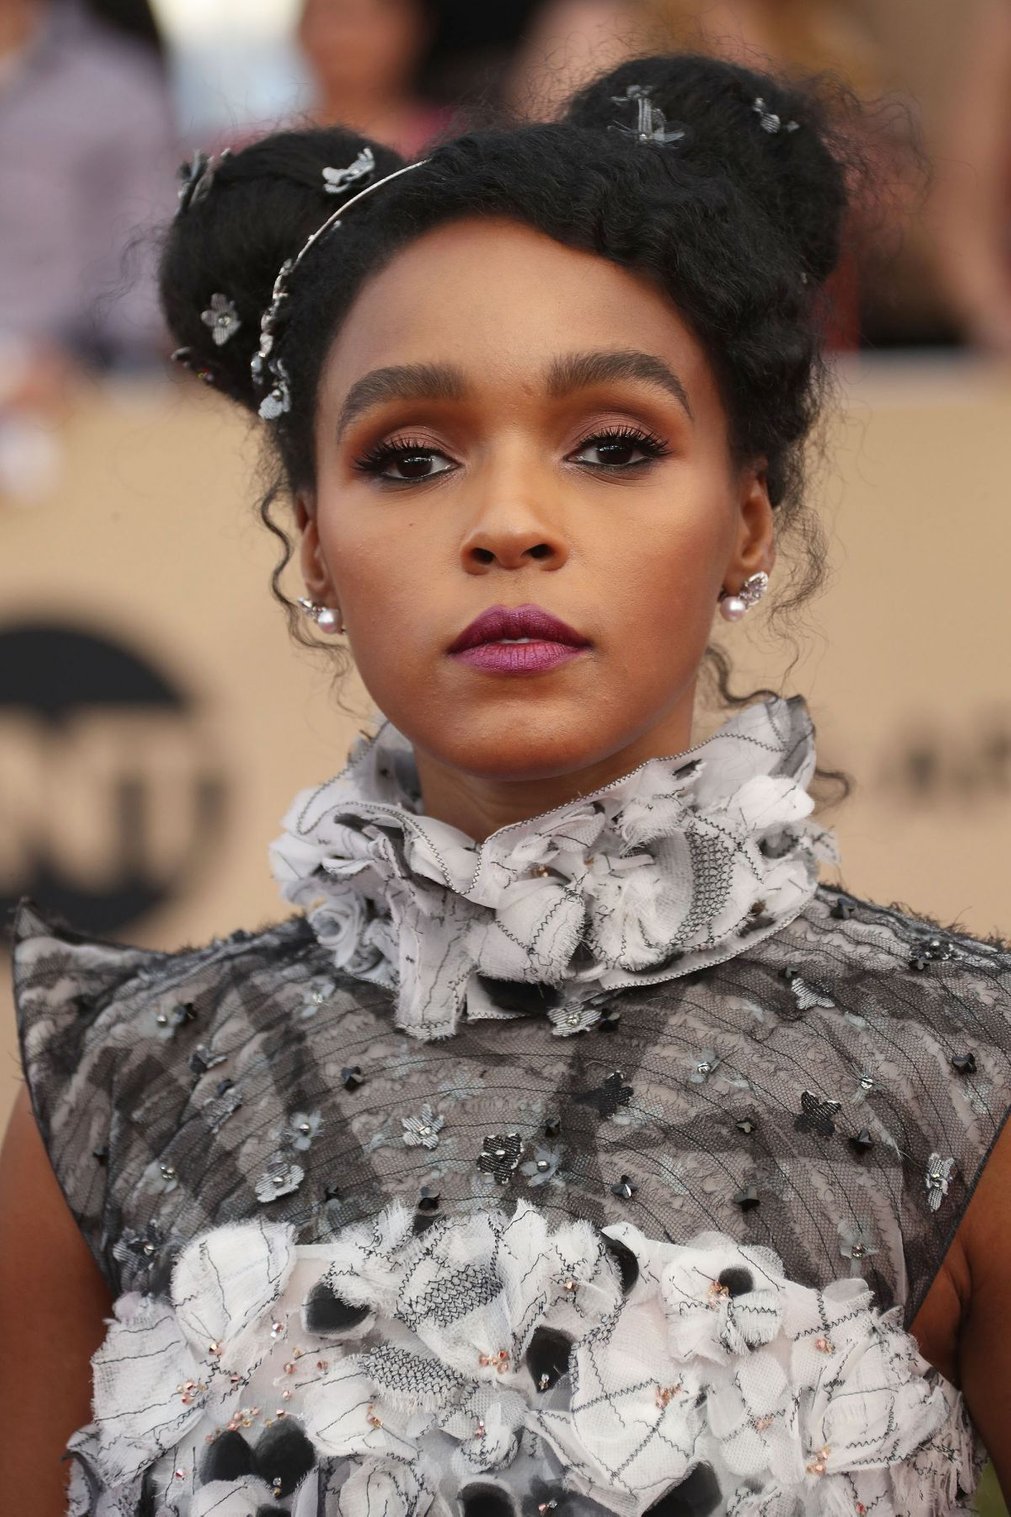 http://www.hawtcelebs.com/wp-content/uploads/2017/01/janelle-monae-at-23rd-annual-screen-actors-guild-awards-in-los-angeles-01-29-2017_1.jpg